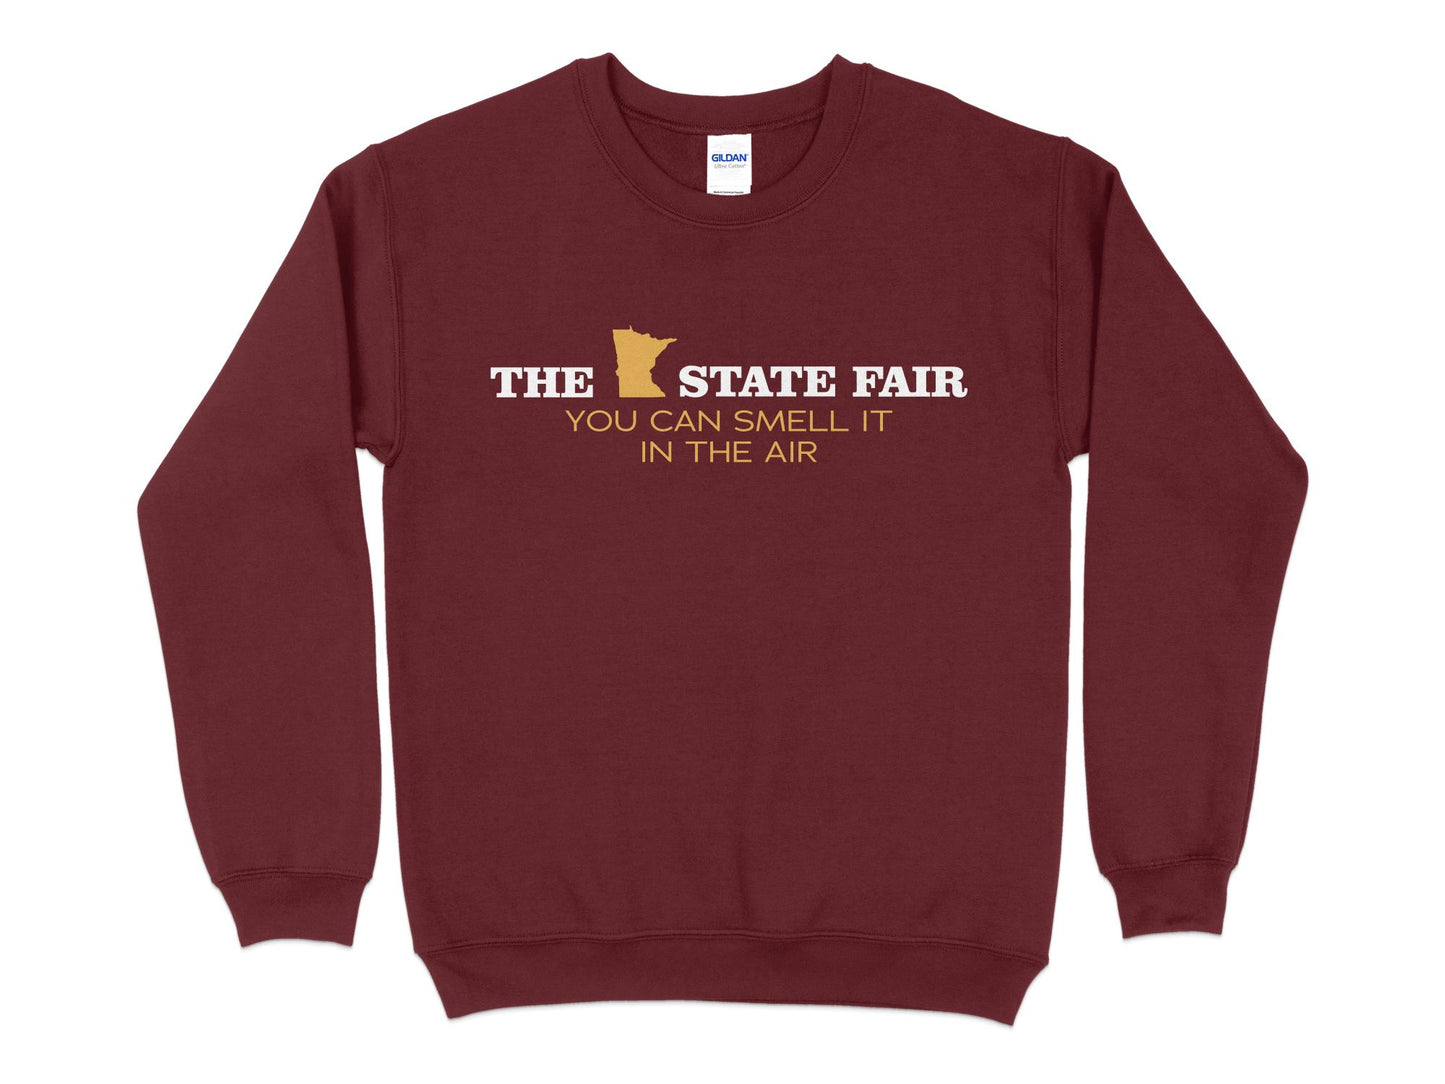 Minnesota State Fair Sweatshirt - You Can Smell It in the Air, maroon